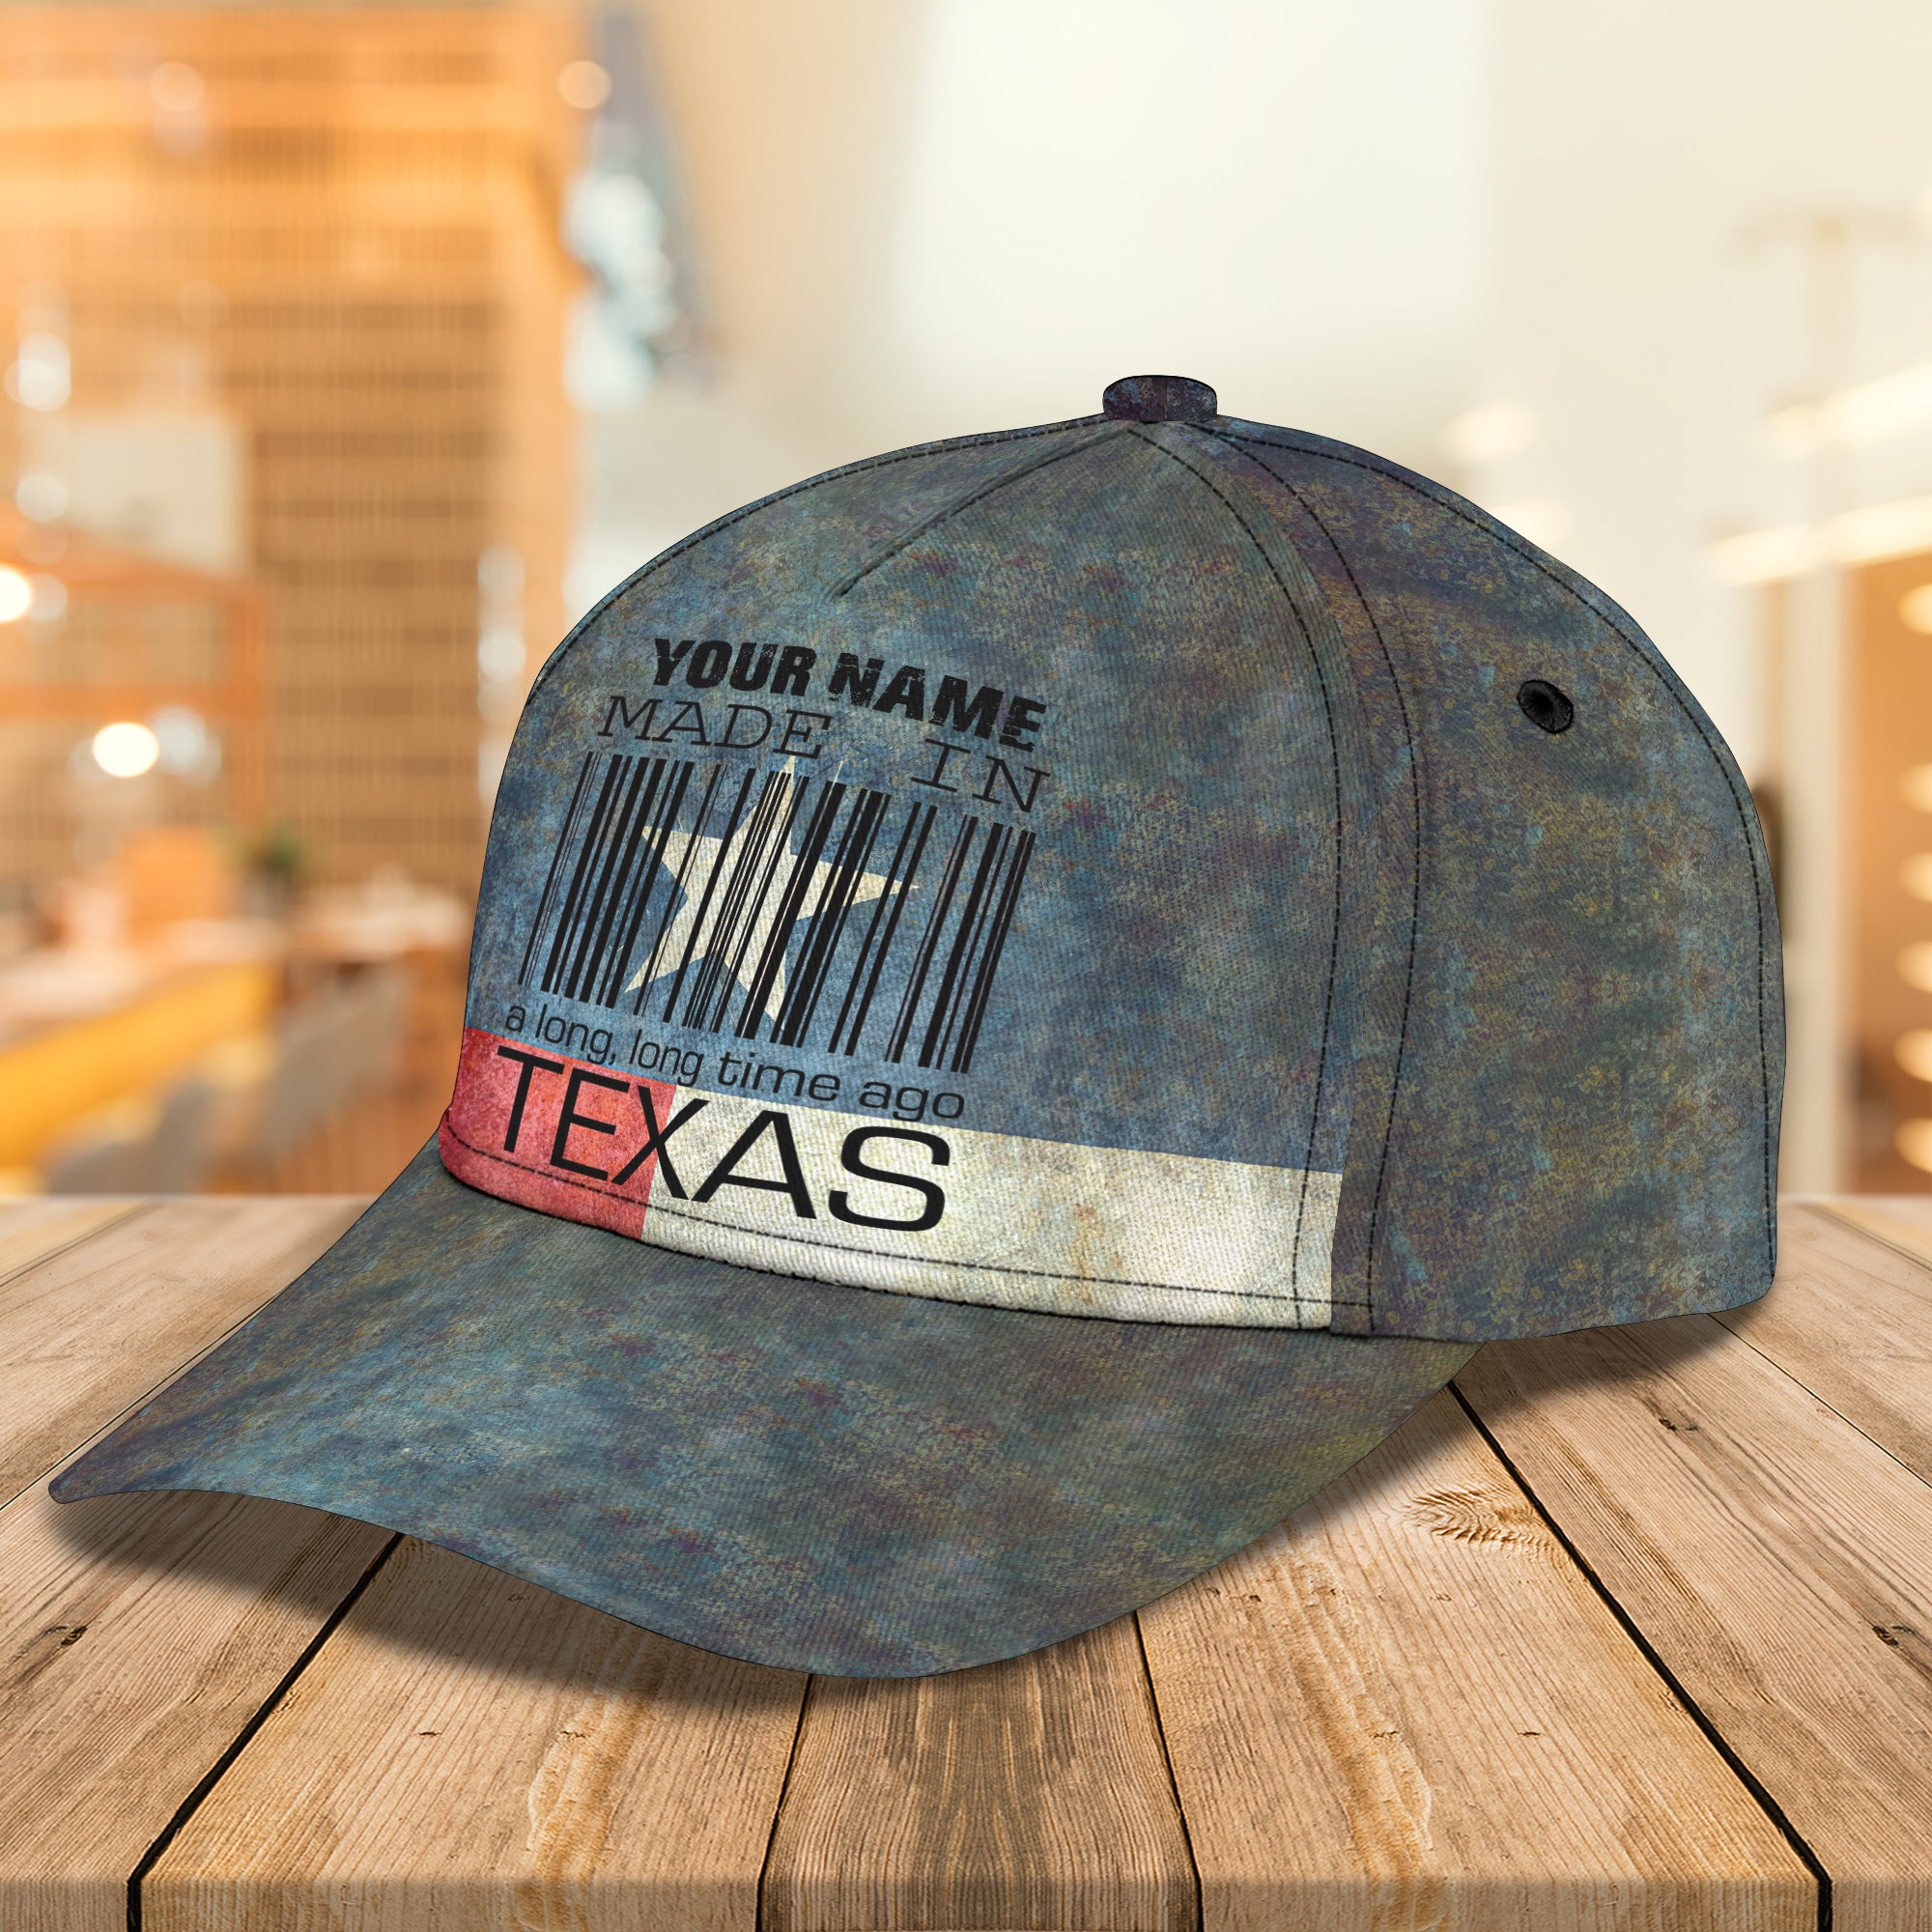 Texas - Personalized Name Cap - Co98